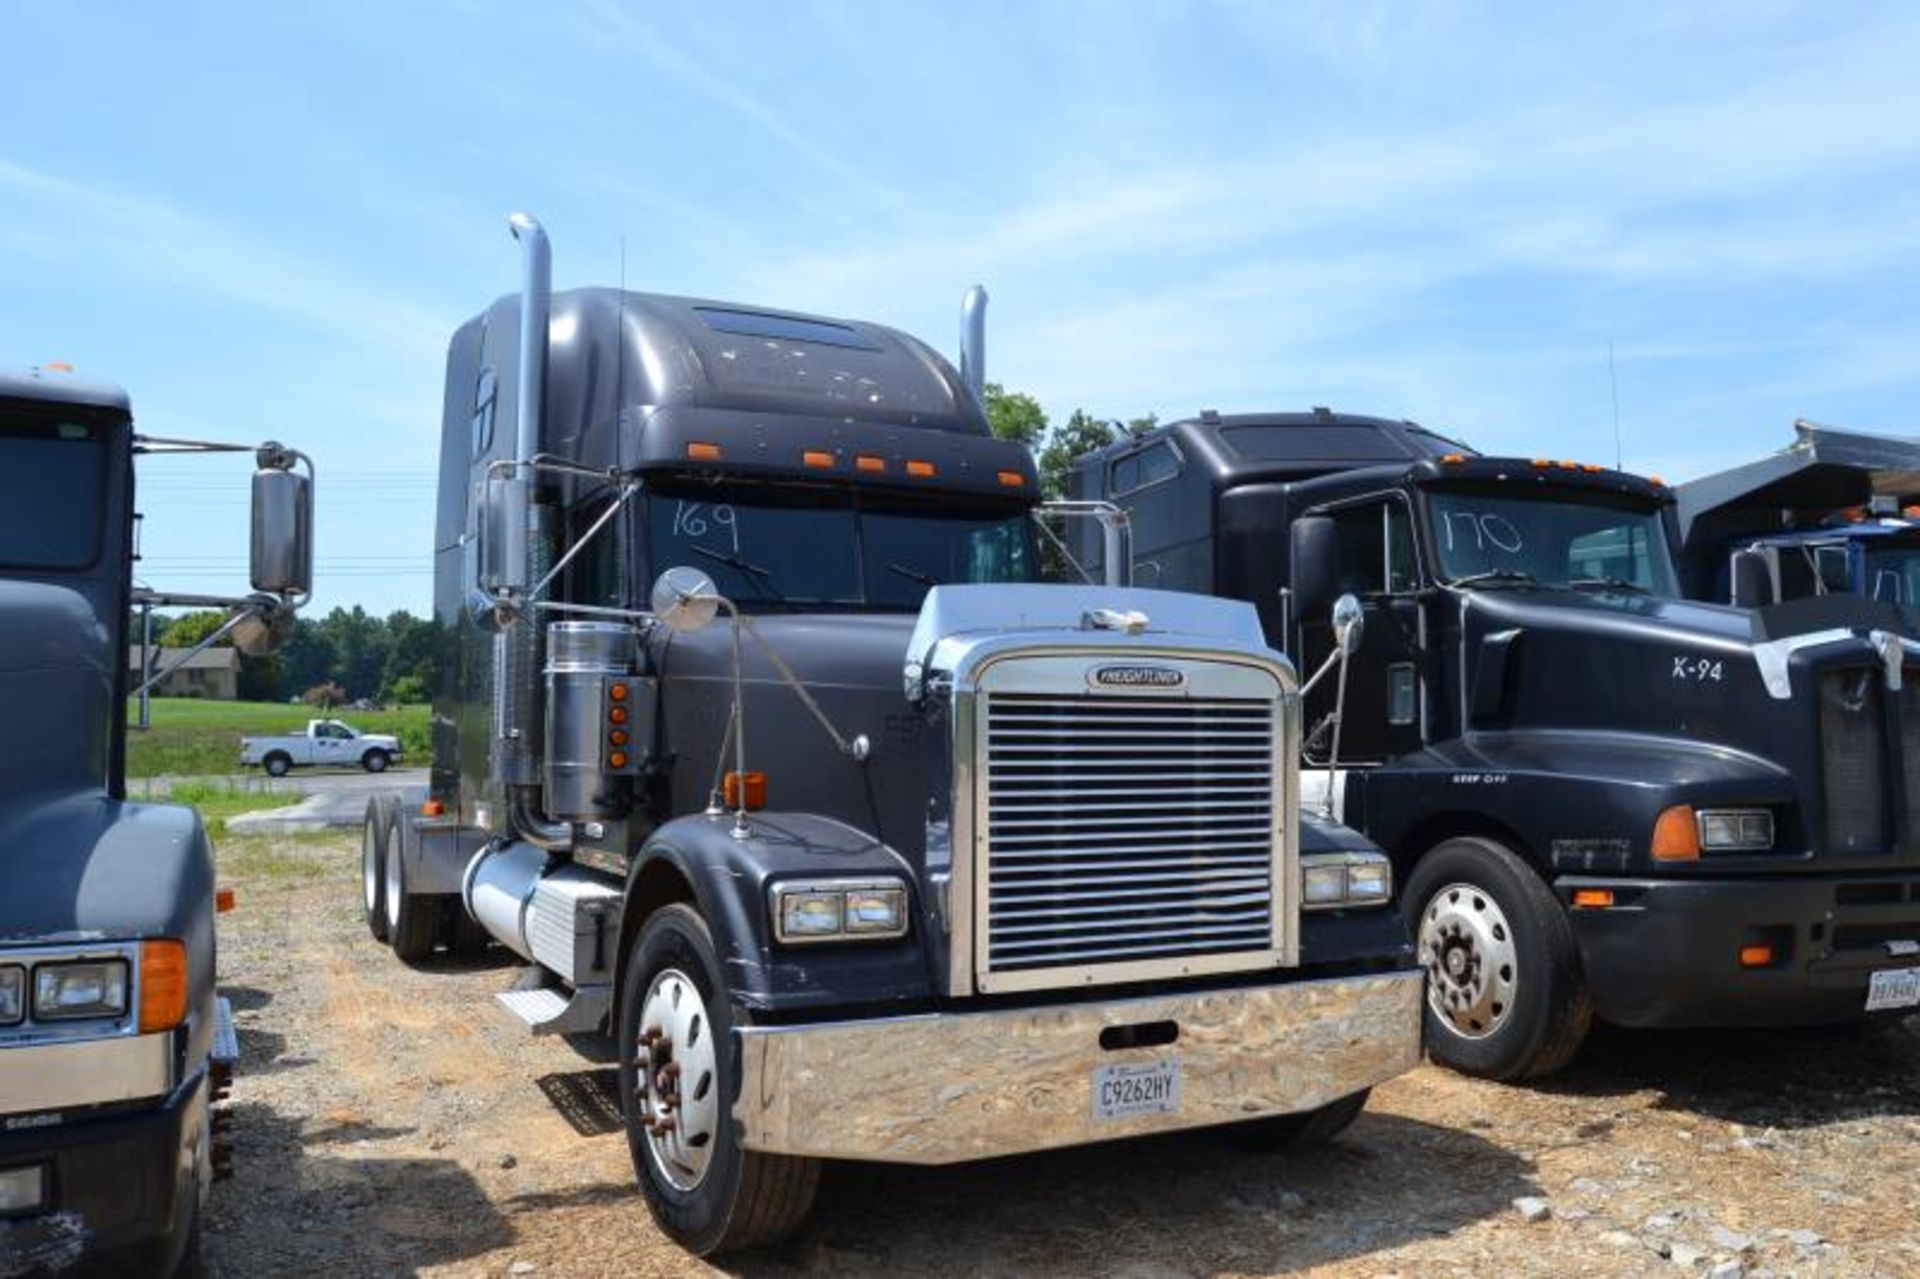 1997 FREIGHTLINER ROAD TRACTOR W/ SLEEPER W/ CAT ENGINE W/ 13 SPEED TRANS W/ AIR RIDE 1044060 MILES